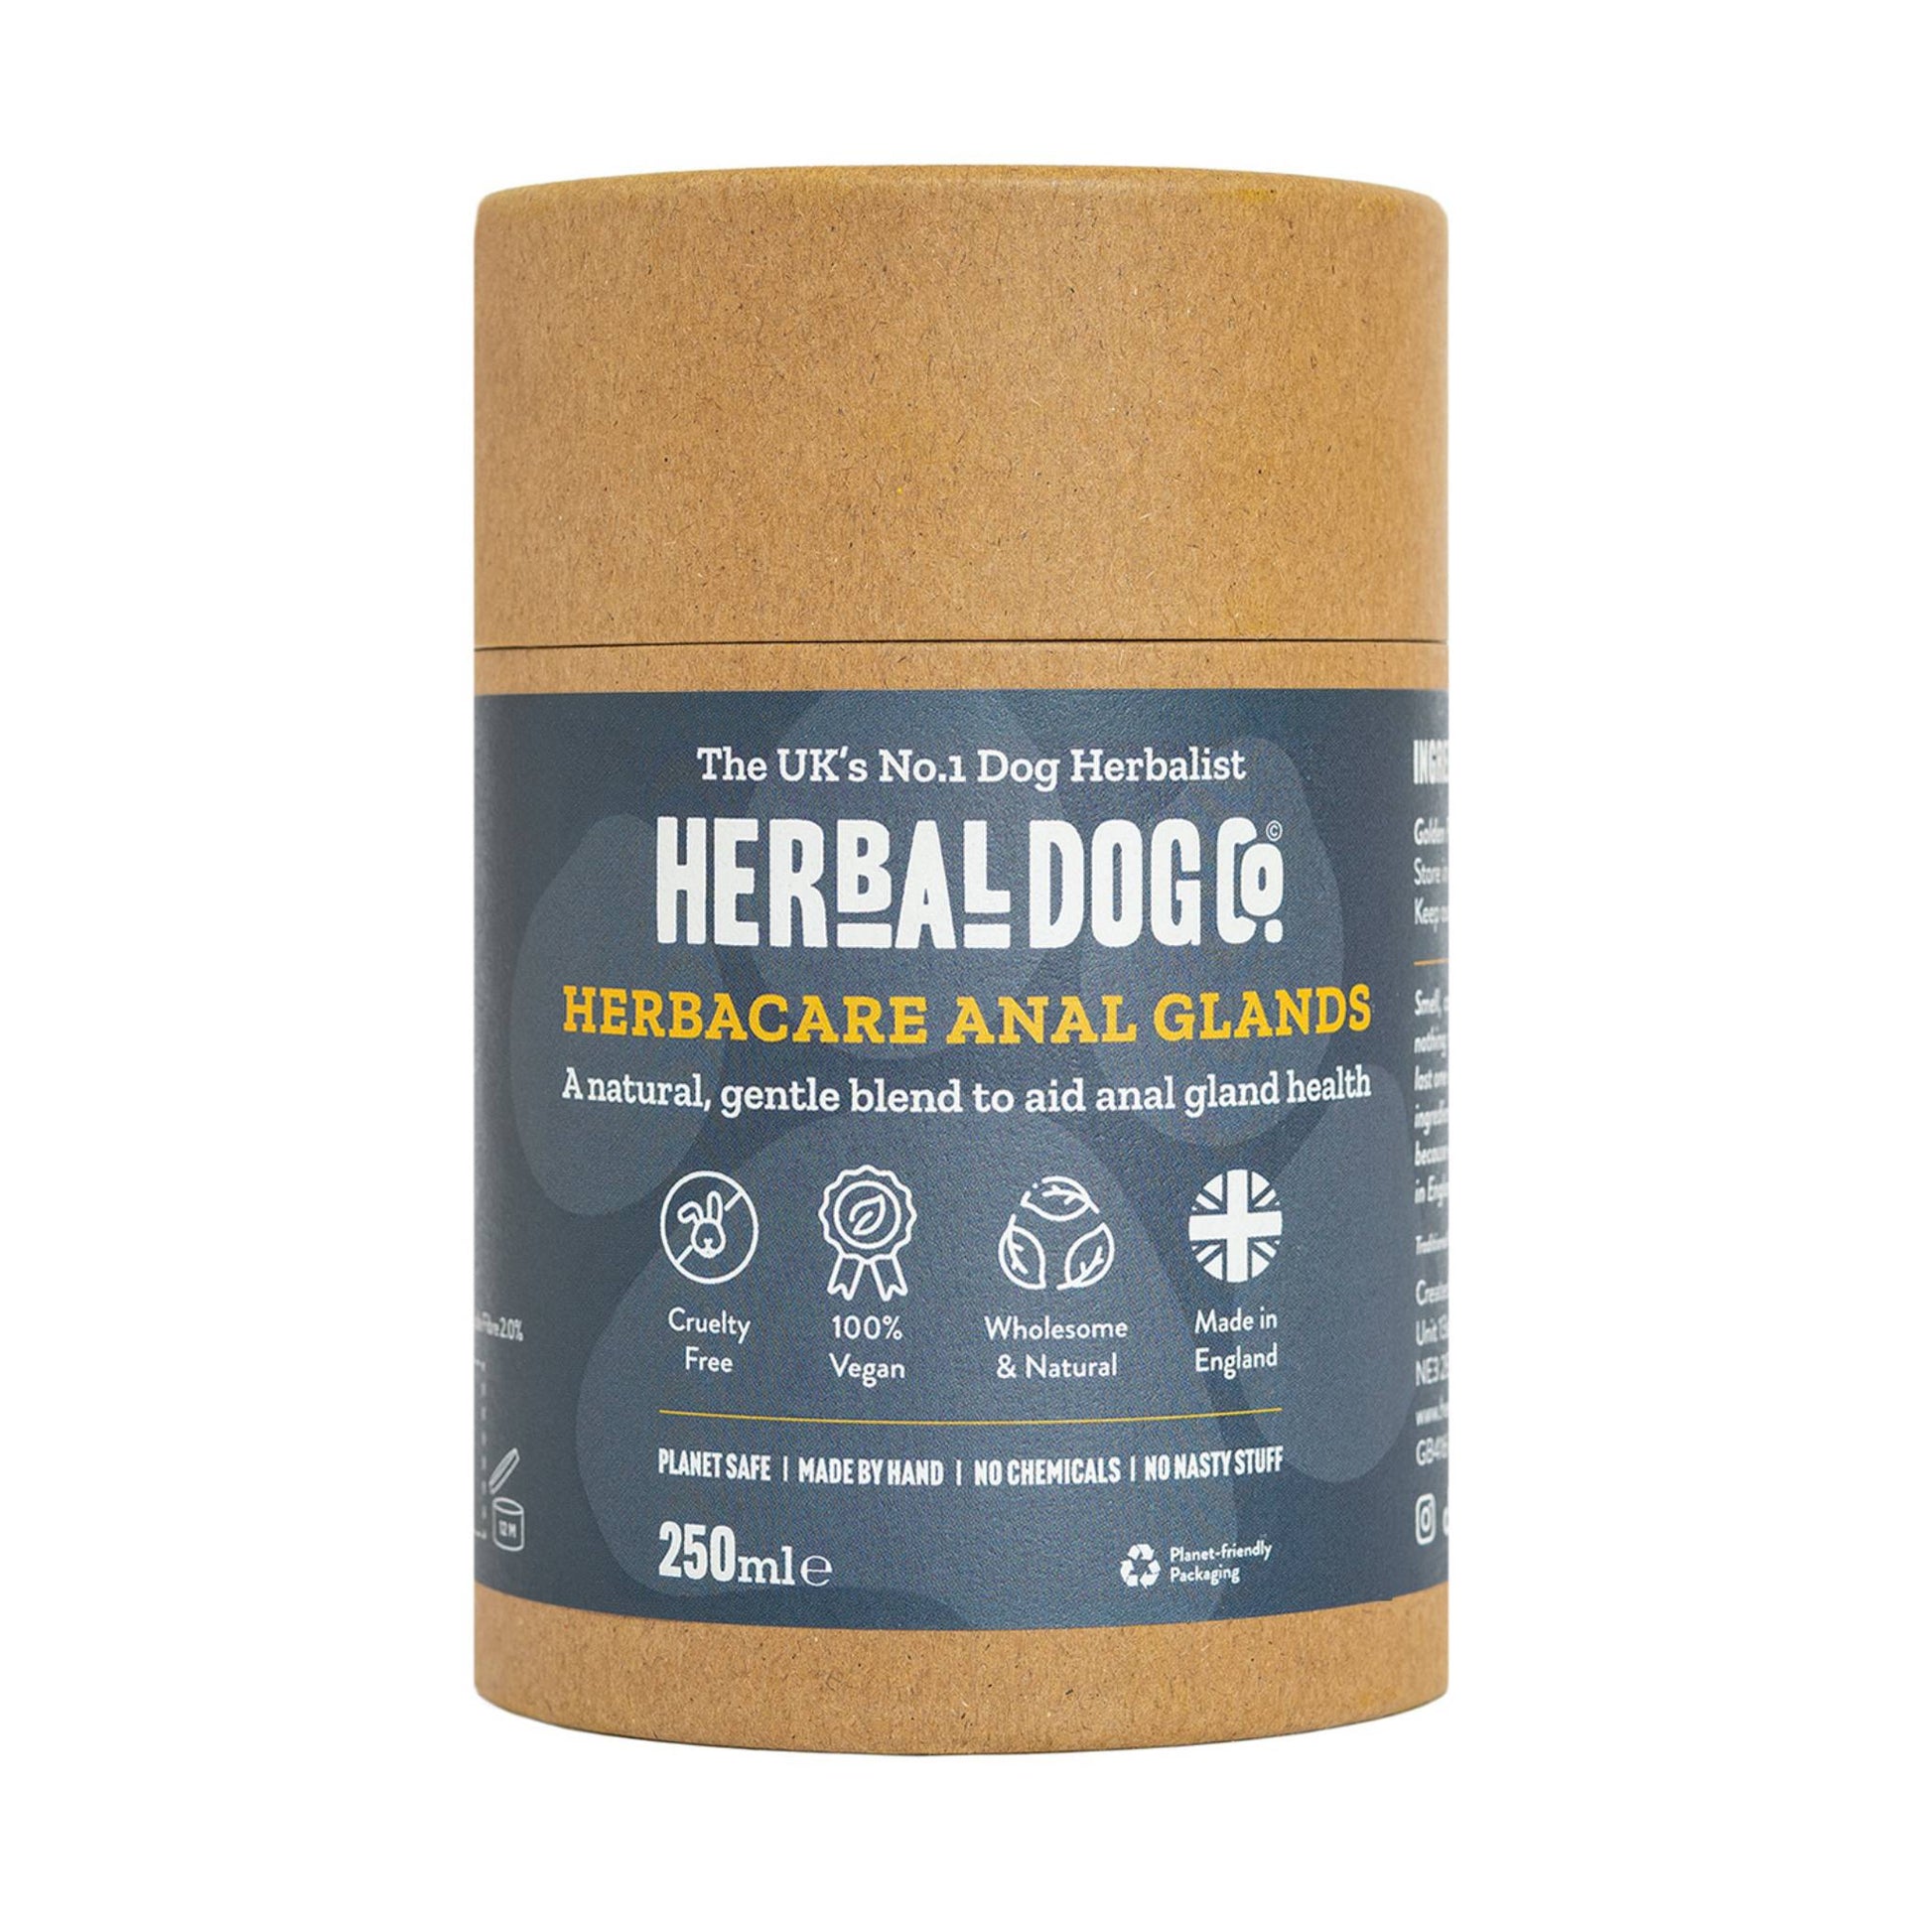 Herbal Dog Co Herbacare Anal Glands Supplement